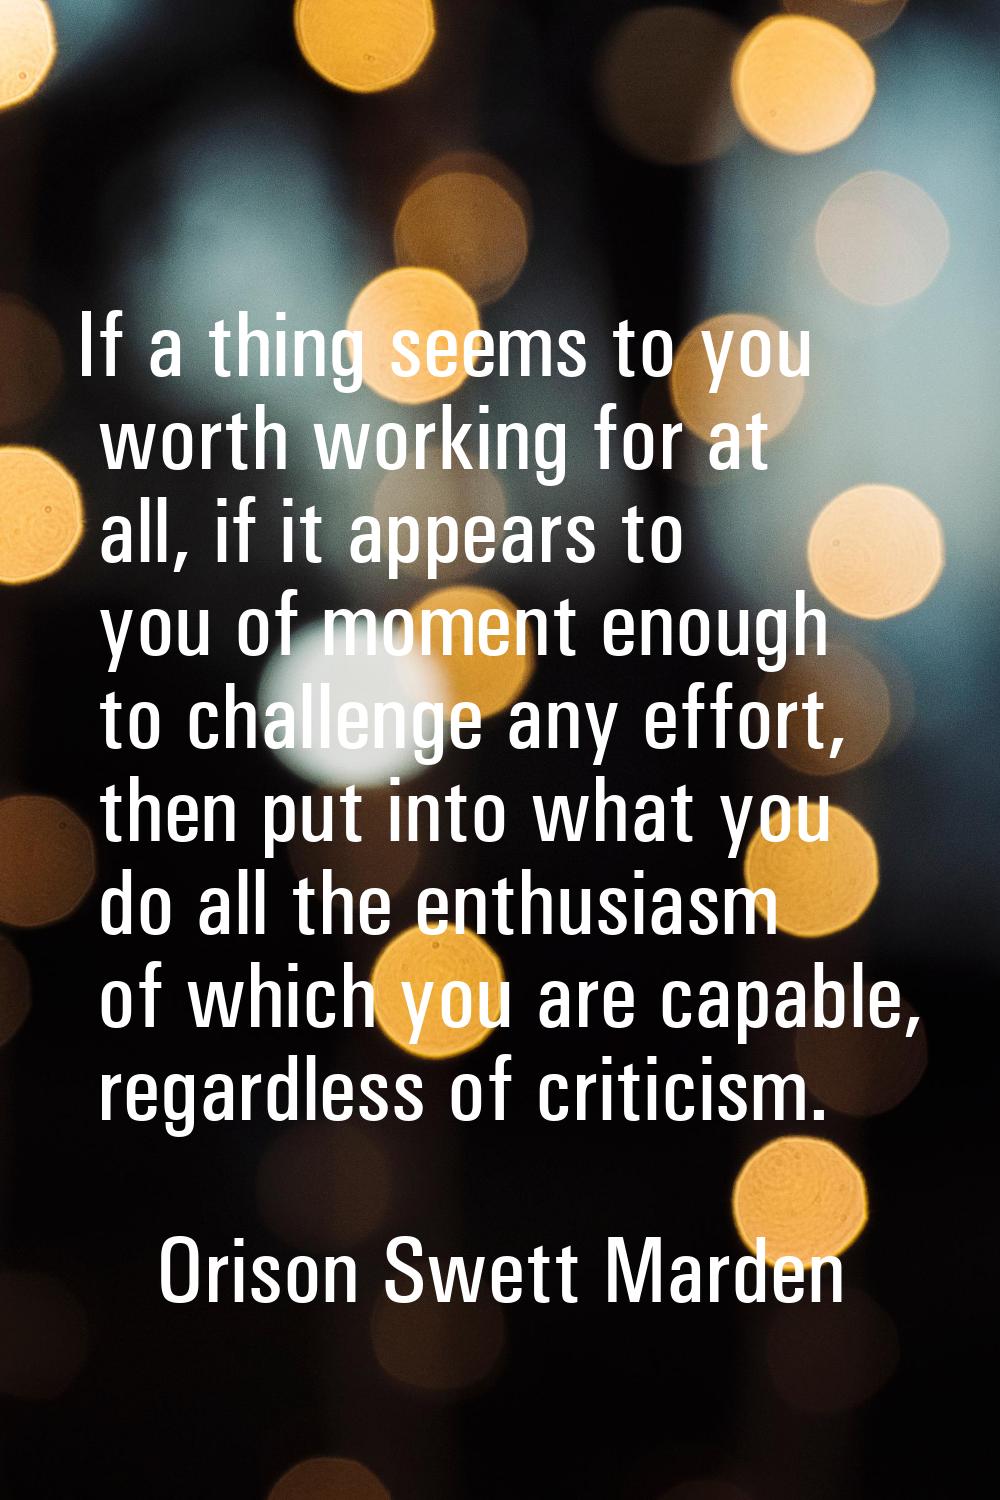 If a thing seems to you worth working for at all, if it appears to you of moment enough to challeng